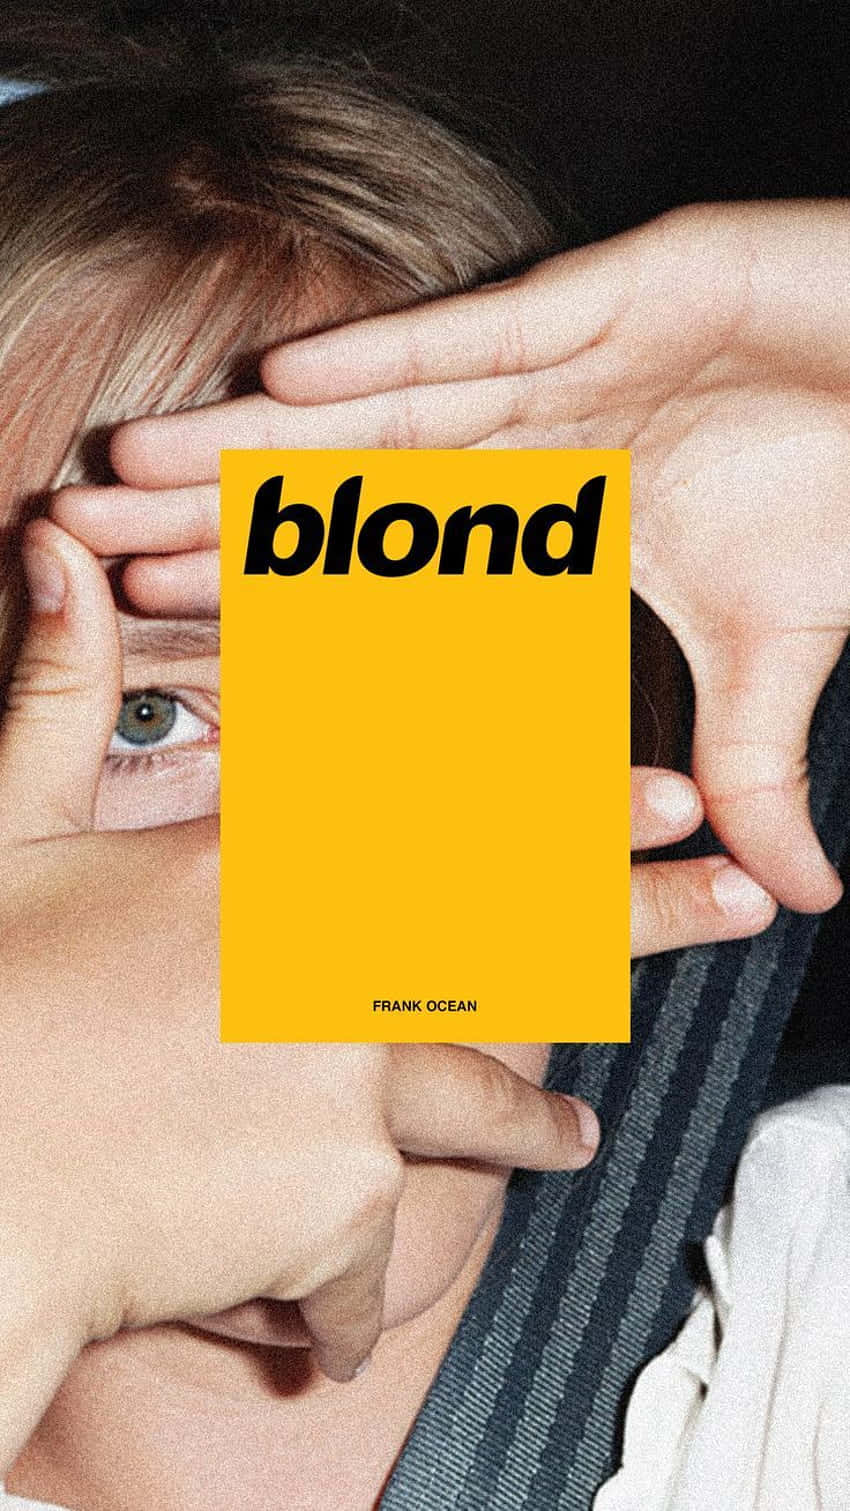 Frank Ocean is Creative and Complex in "Blonde" Wallpaper